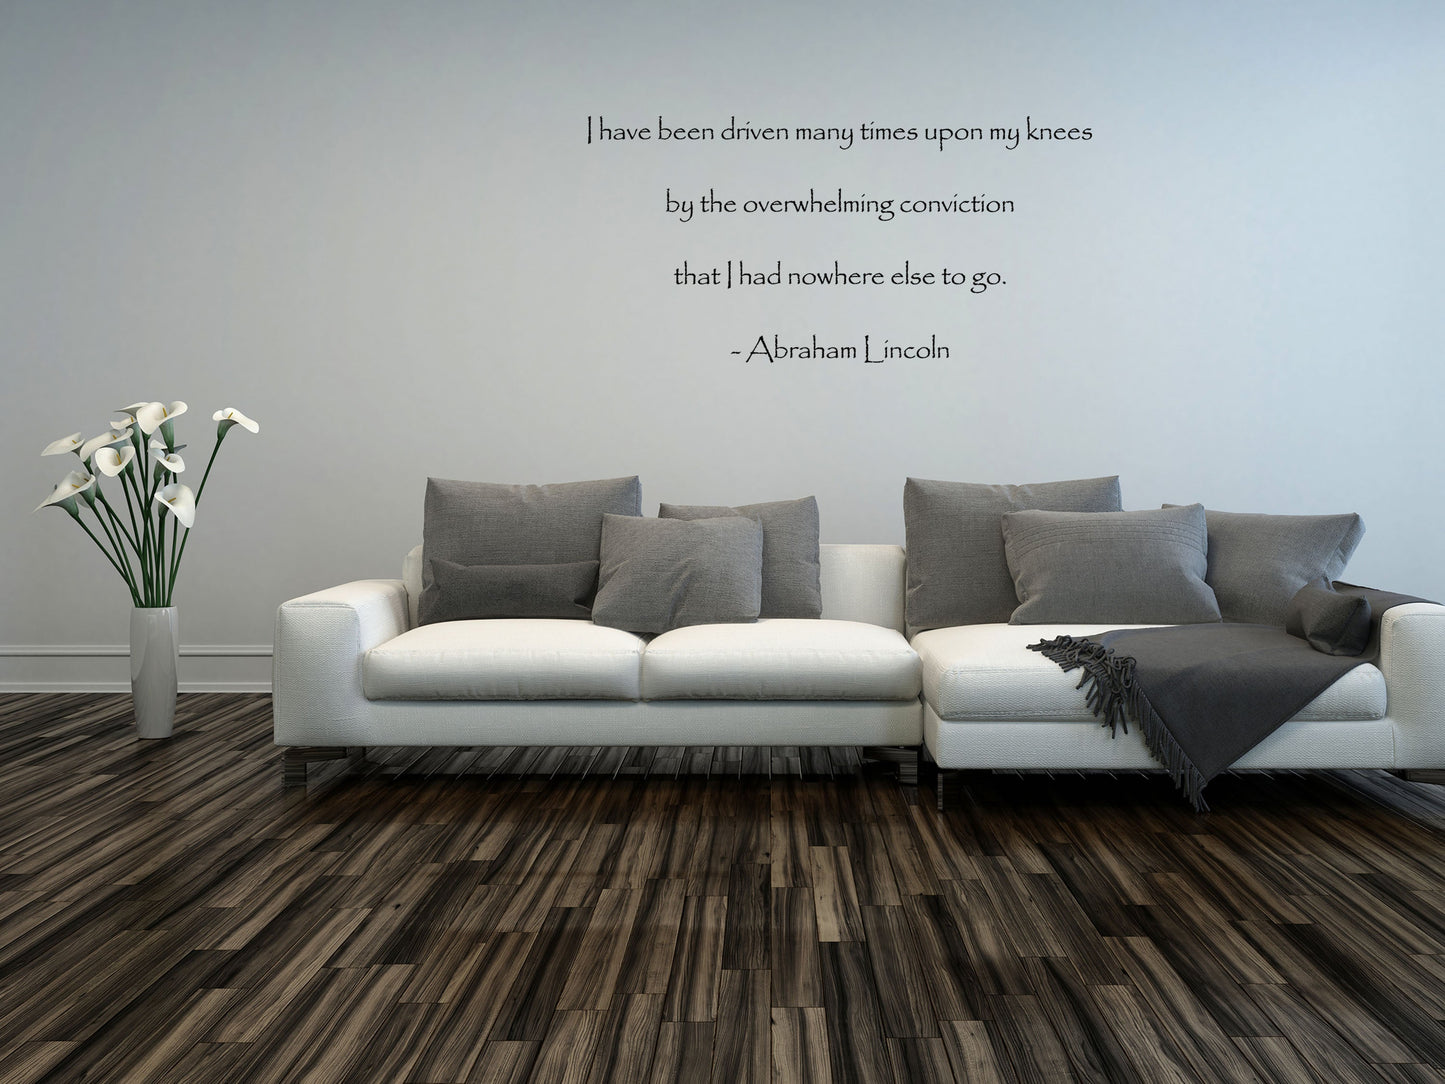 I Have Been Driven Many Times Upon My Knees Abraham Lincoln Wall Quote Handmade Vinyl Wall Art Custom Orders Custom Vinyl Decals Custom Art Vinyl Wall Decal Inspirational Wall Signs 